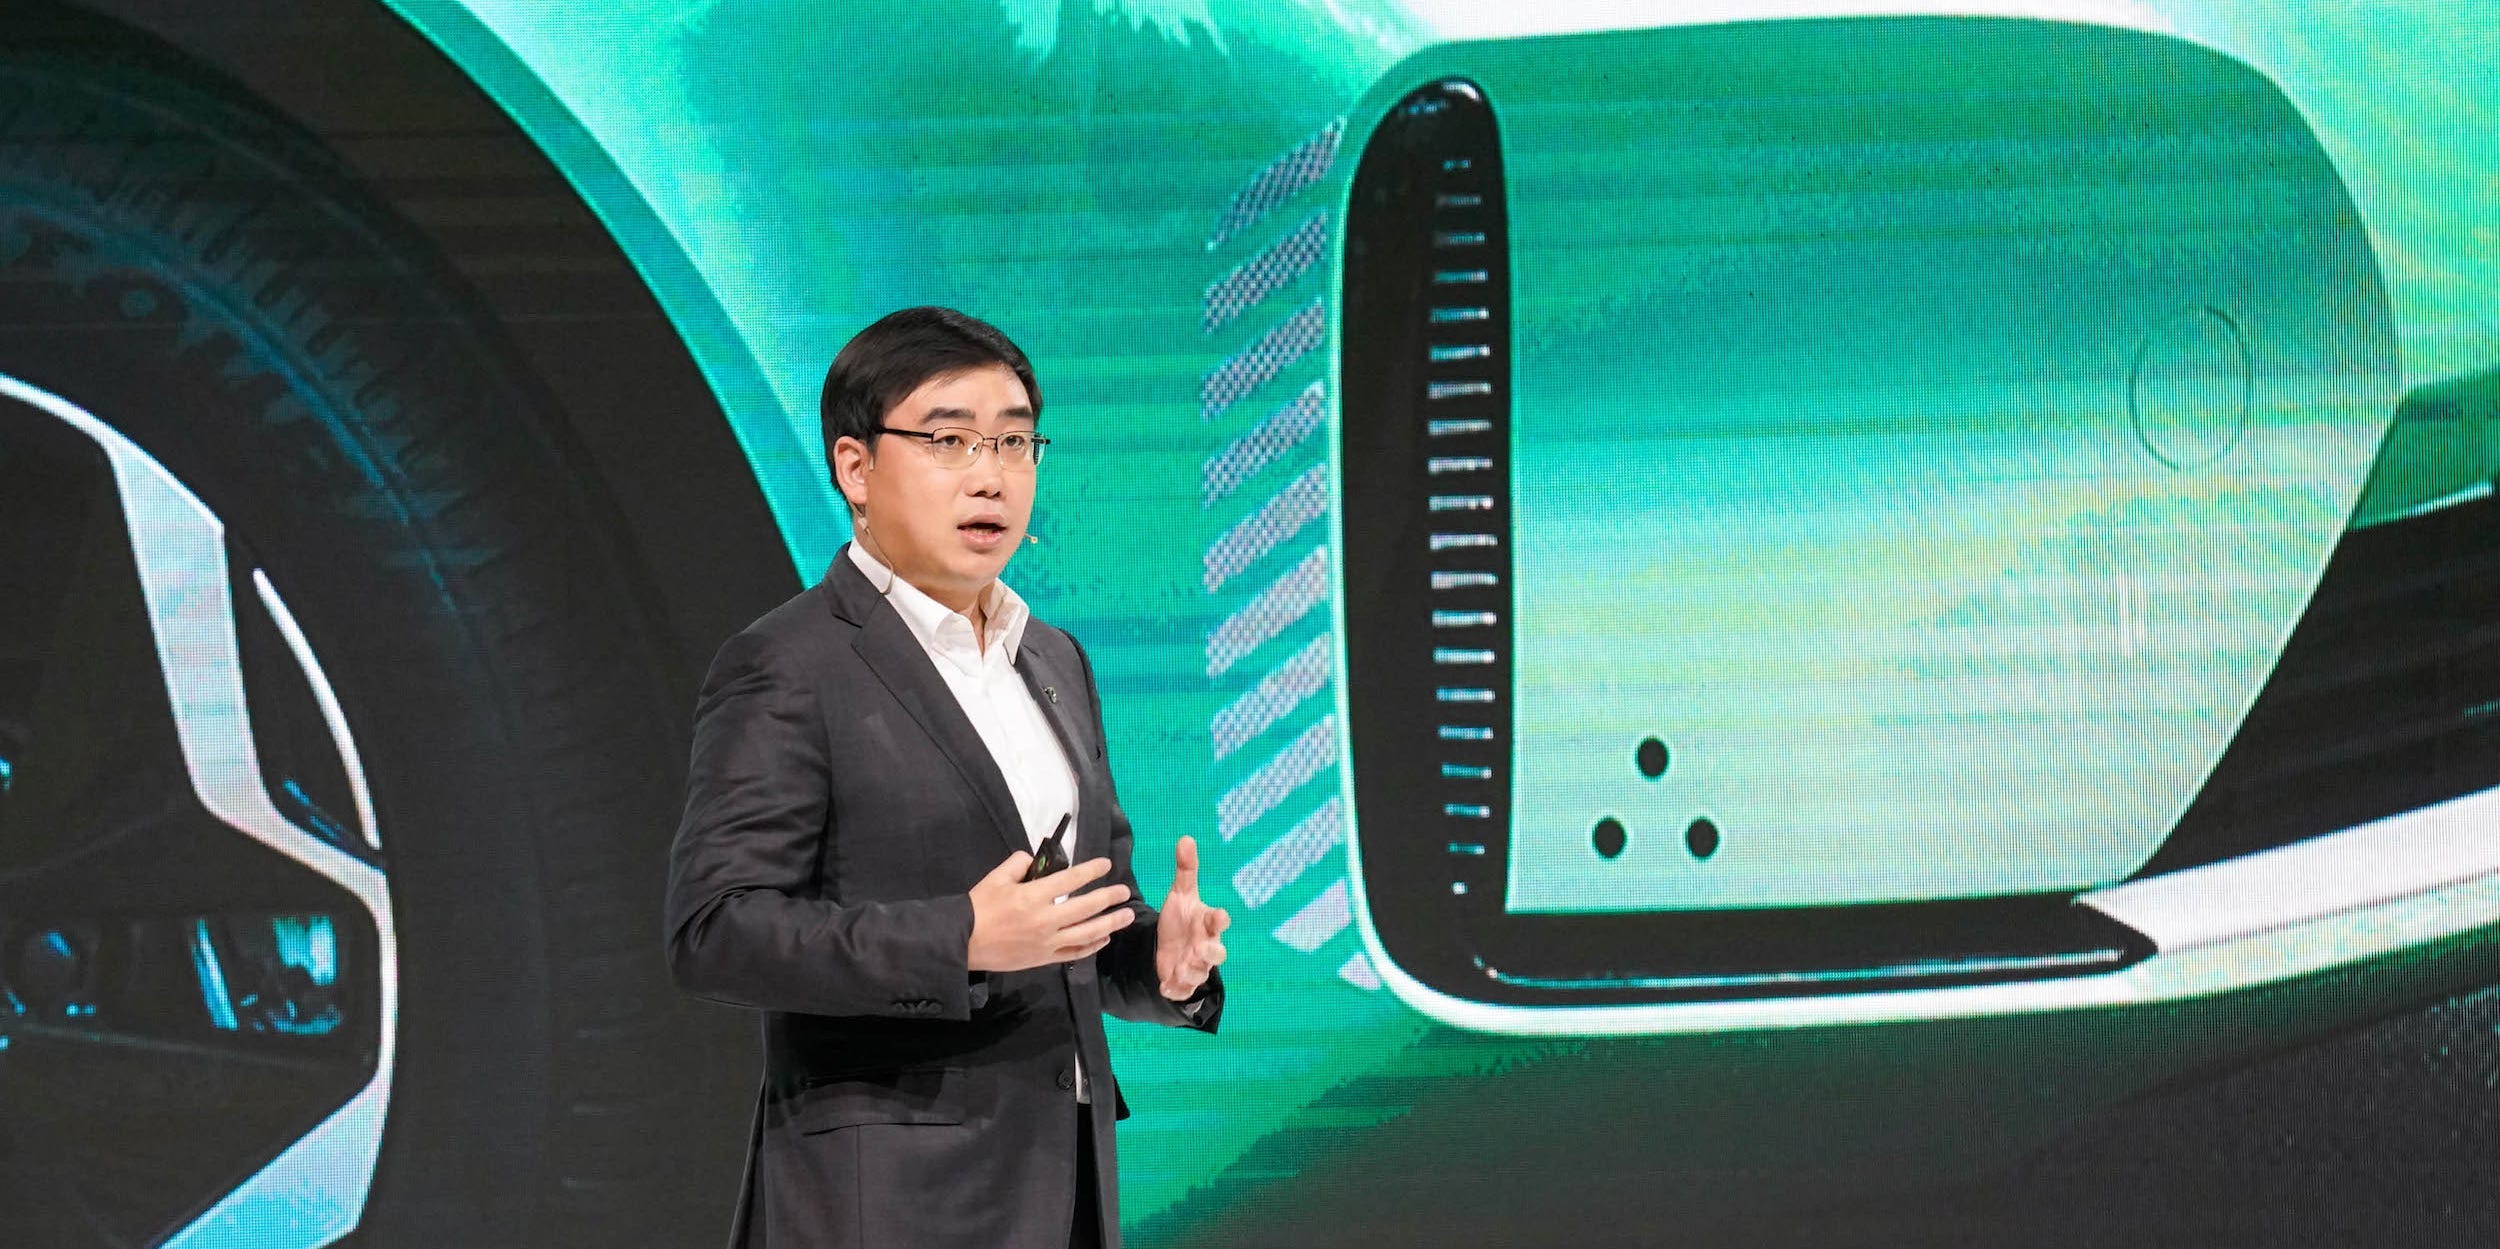 Didi Chuxing's D1 at the launch event in Beijing on November 16, 2020